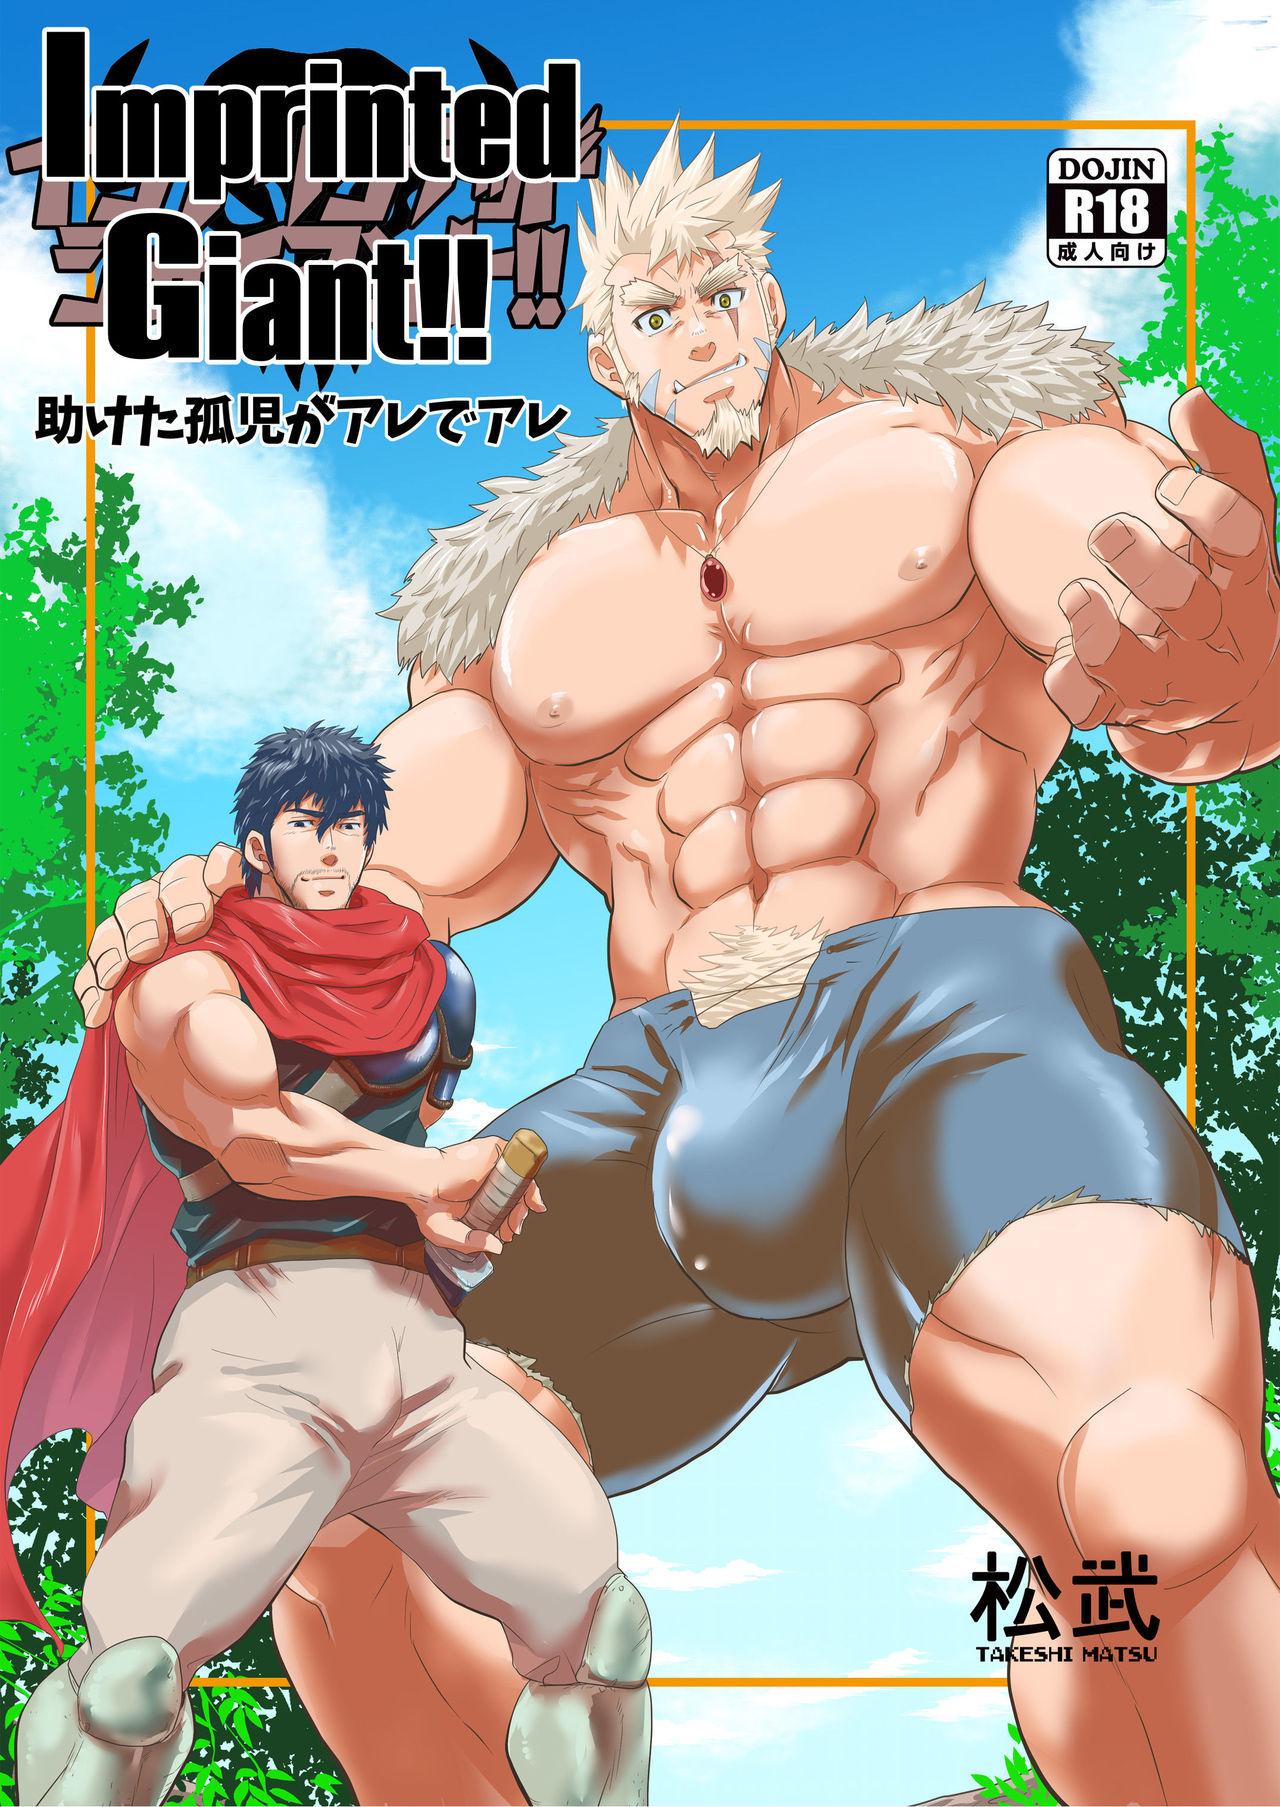 Imprinted Giant!! 0